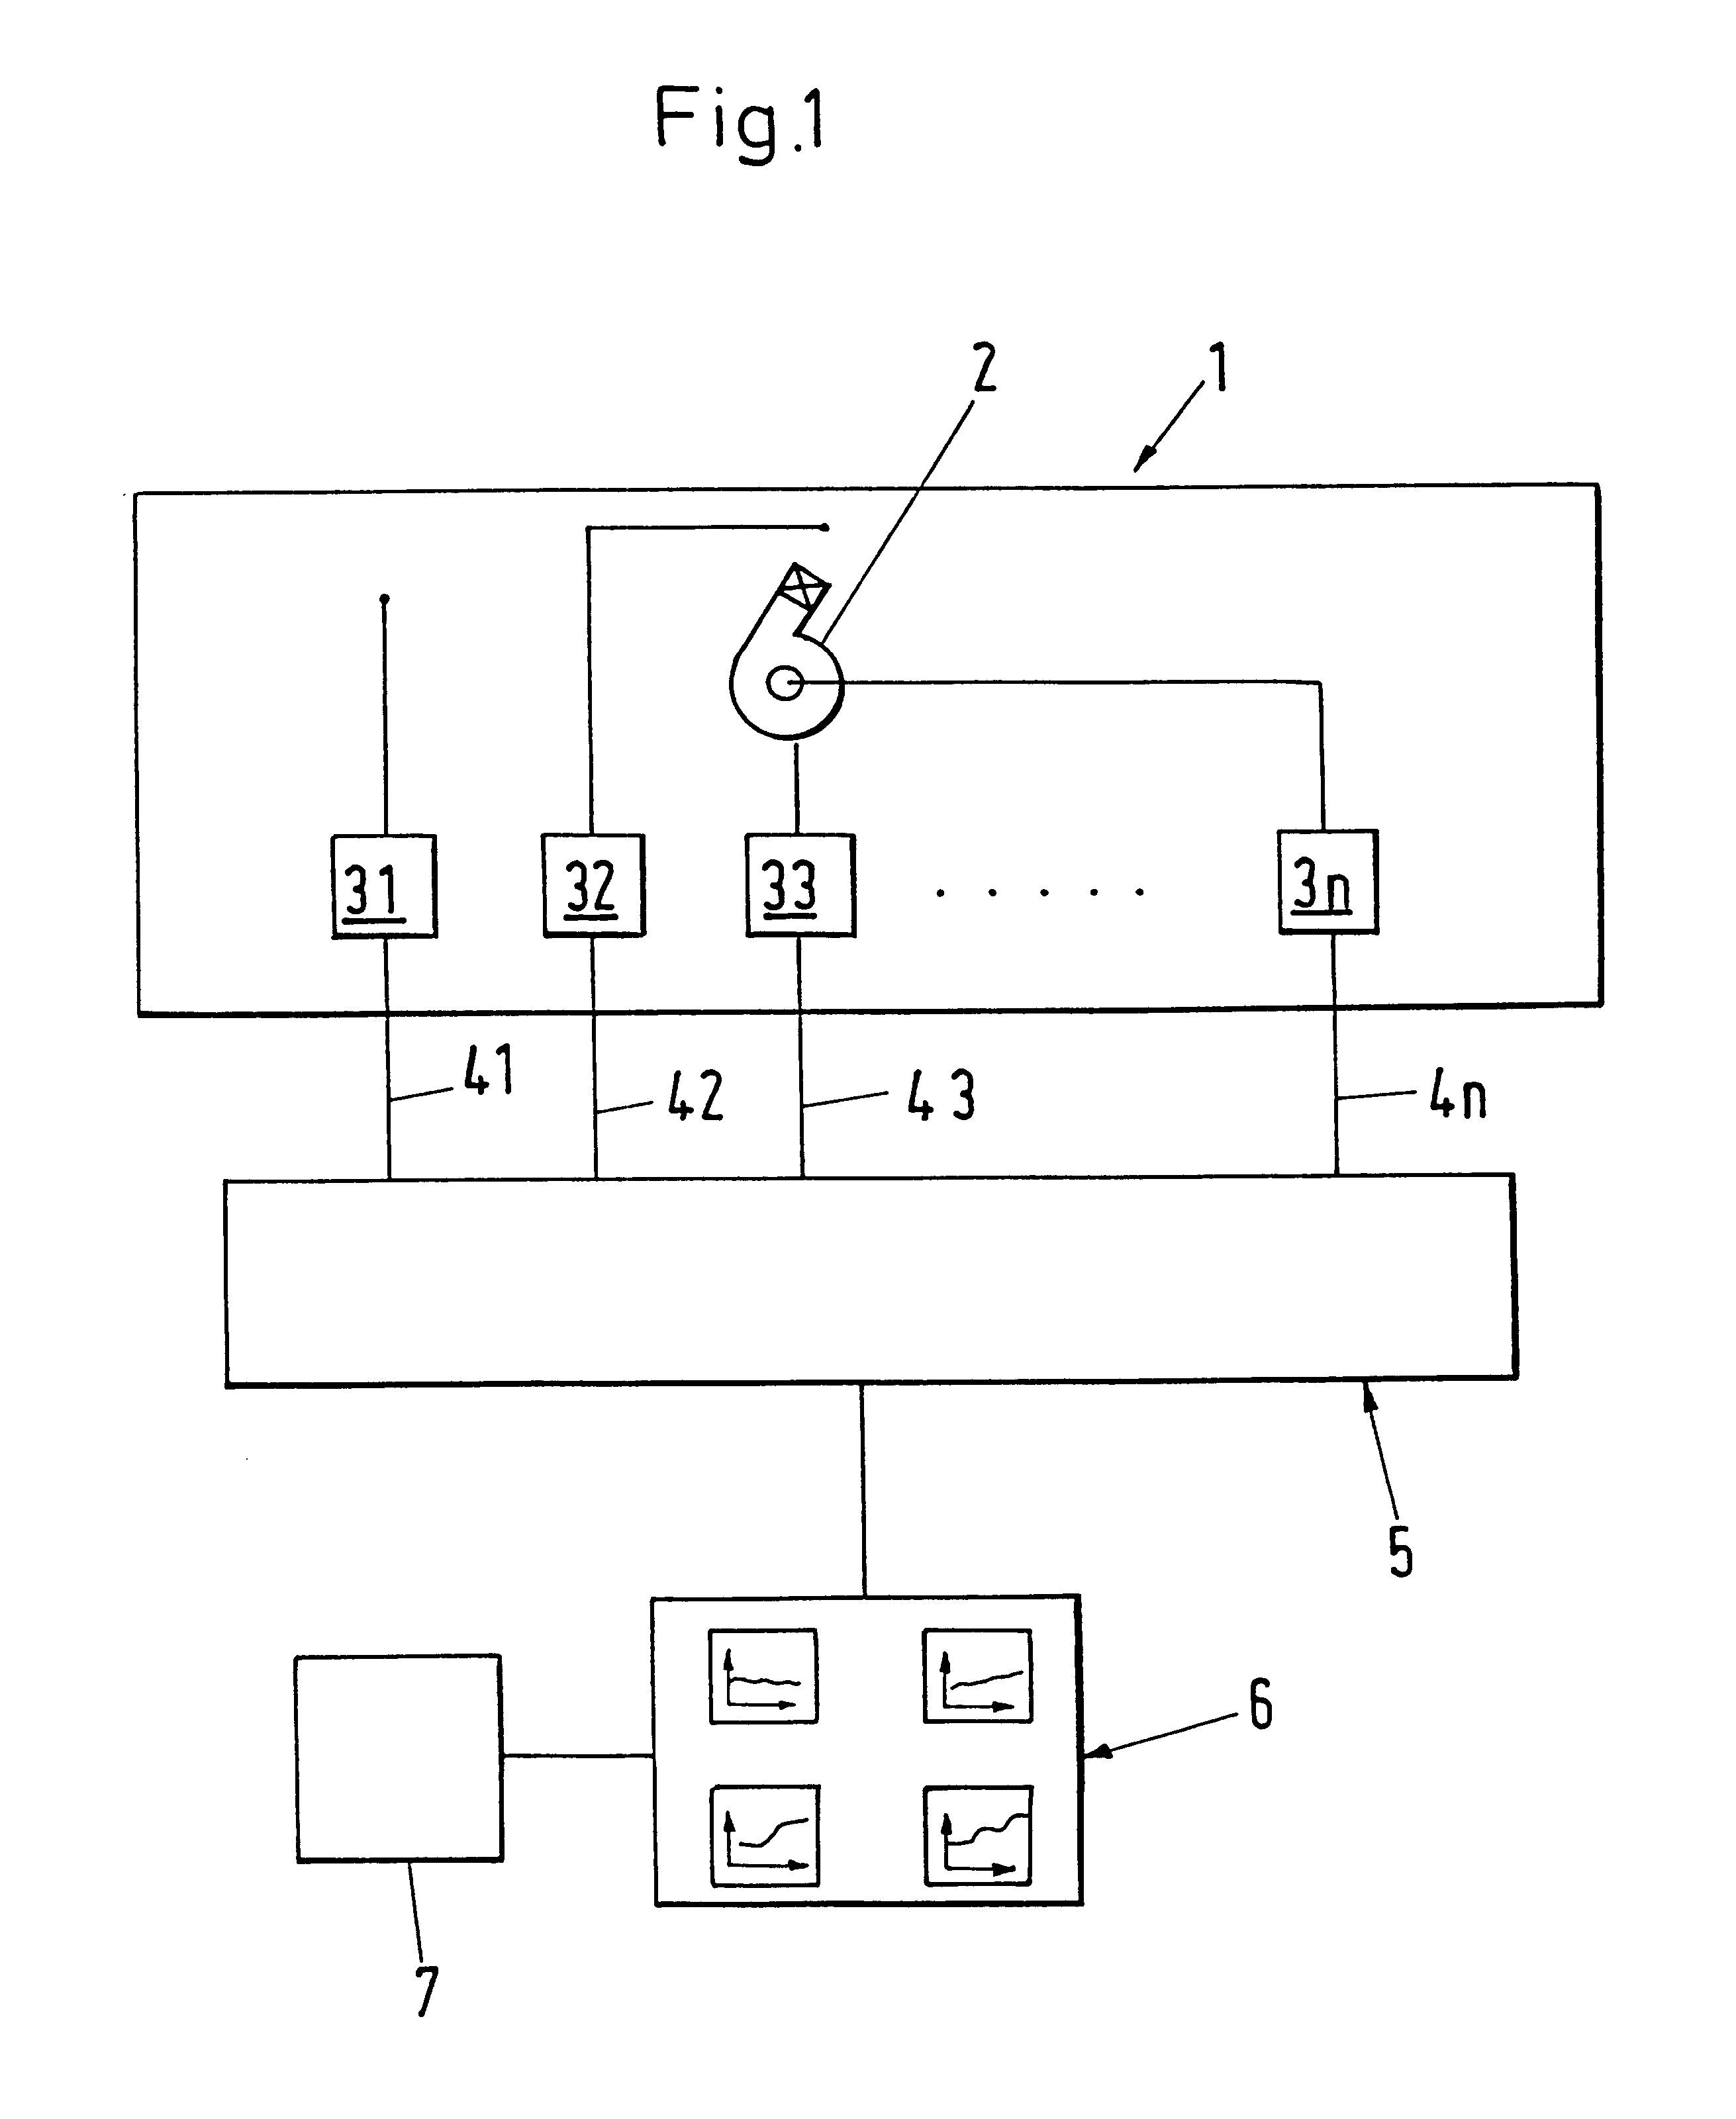 Method for monitoring plants with mechanical components